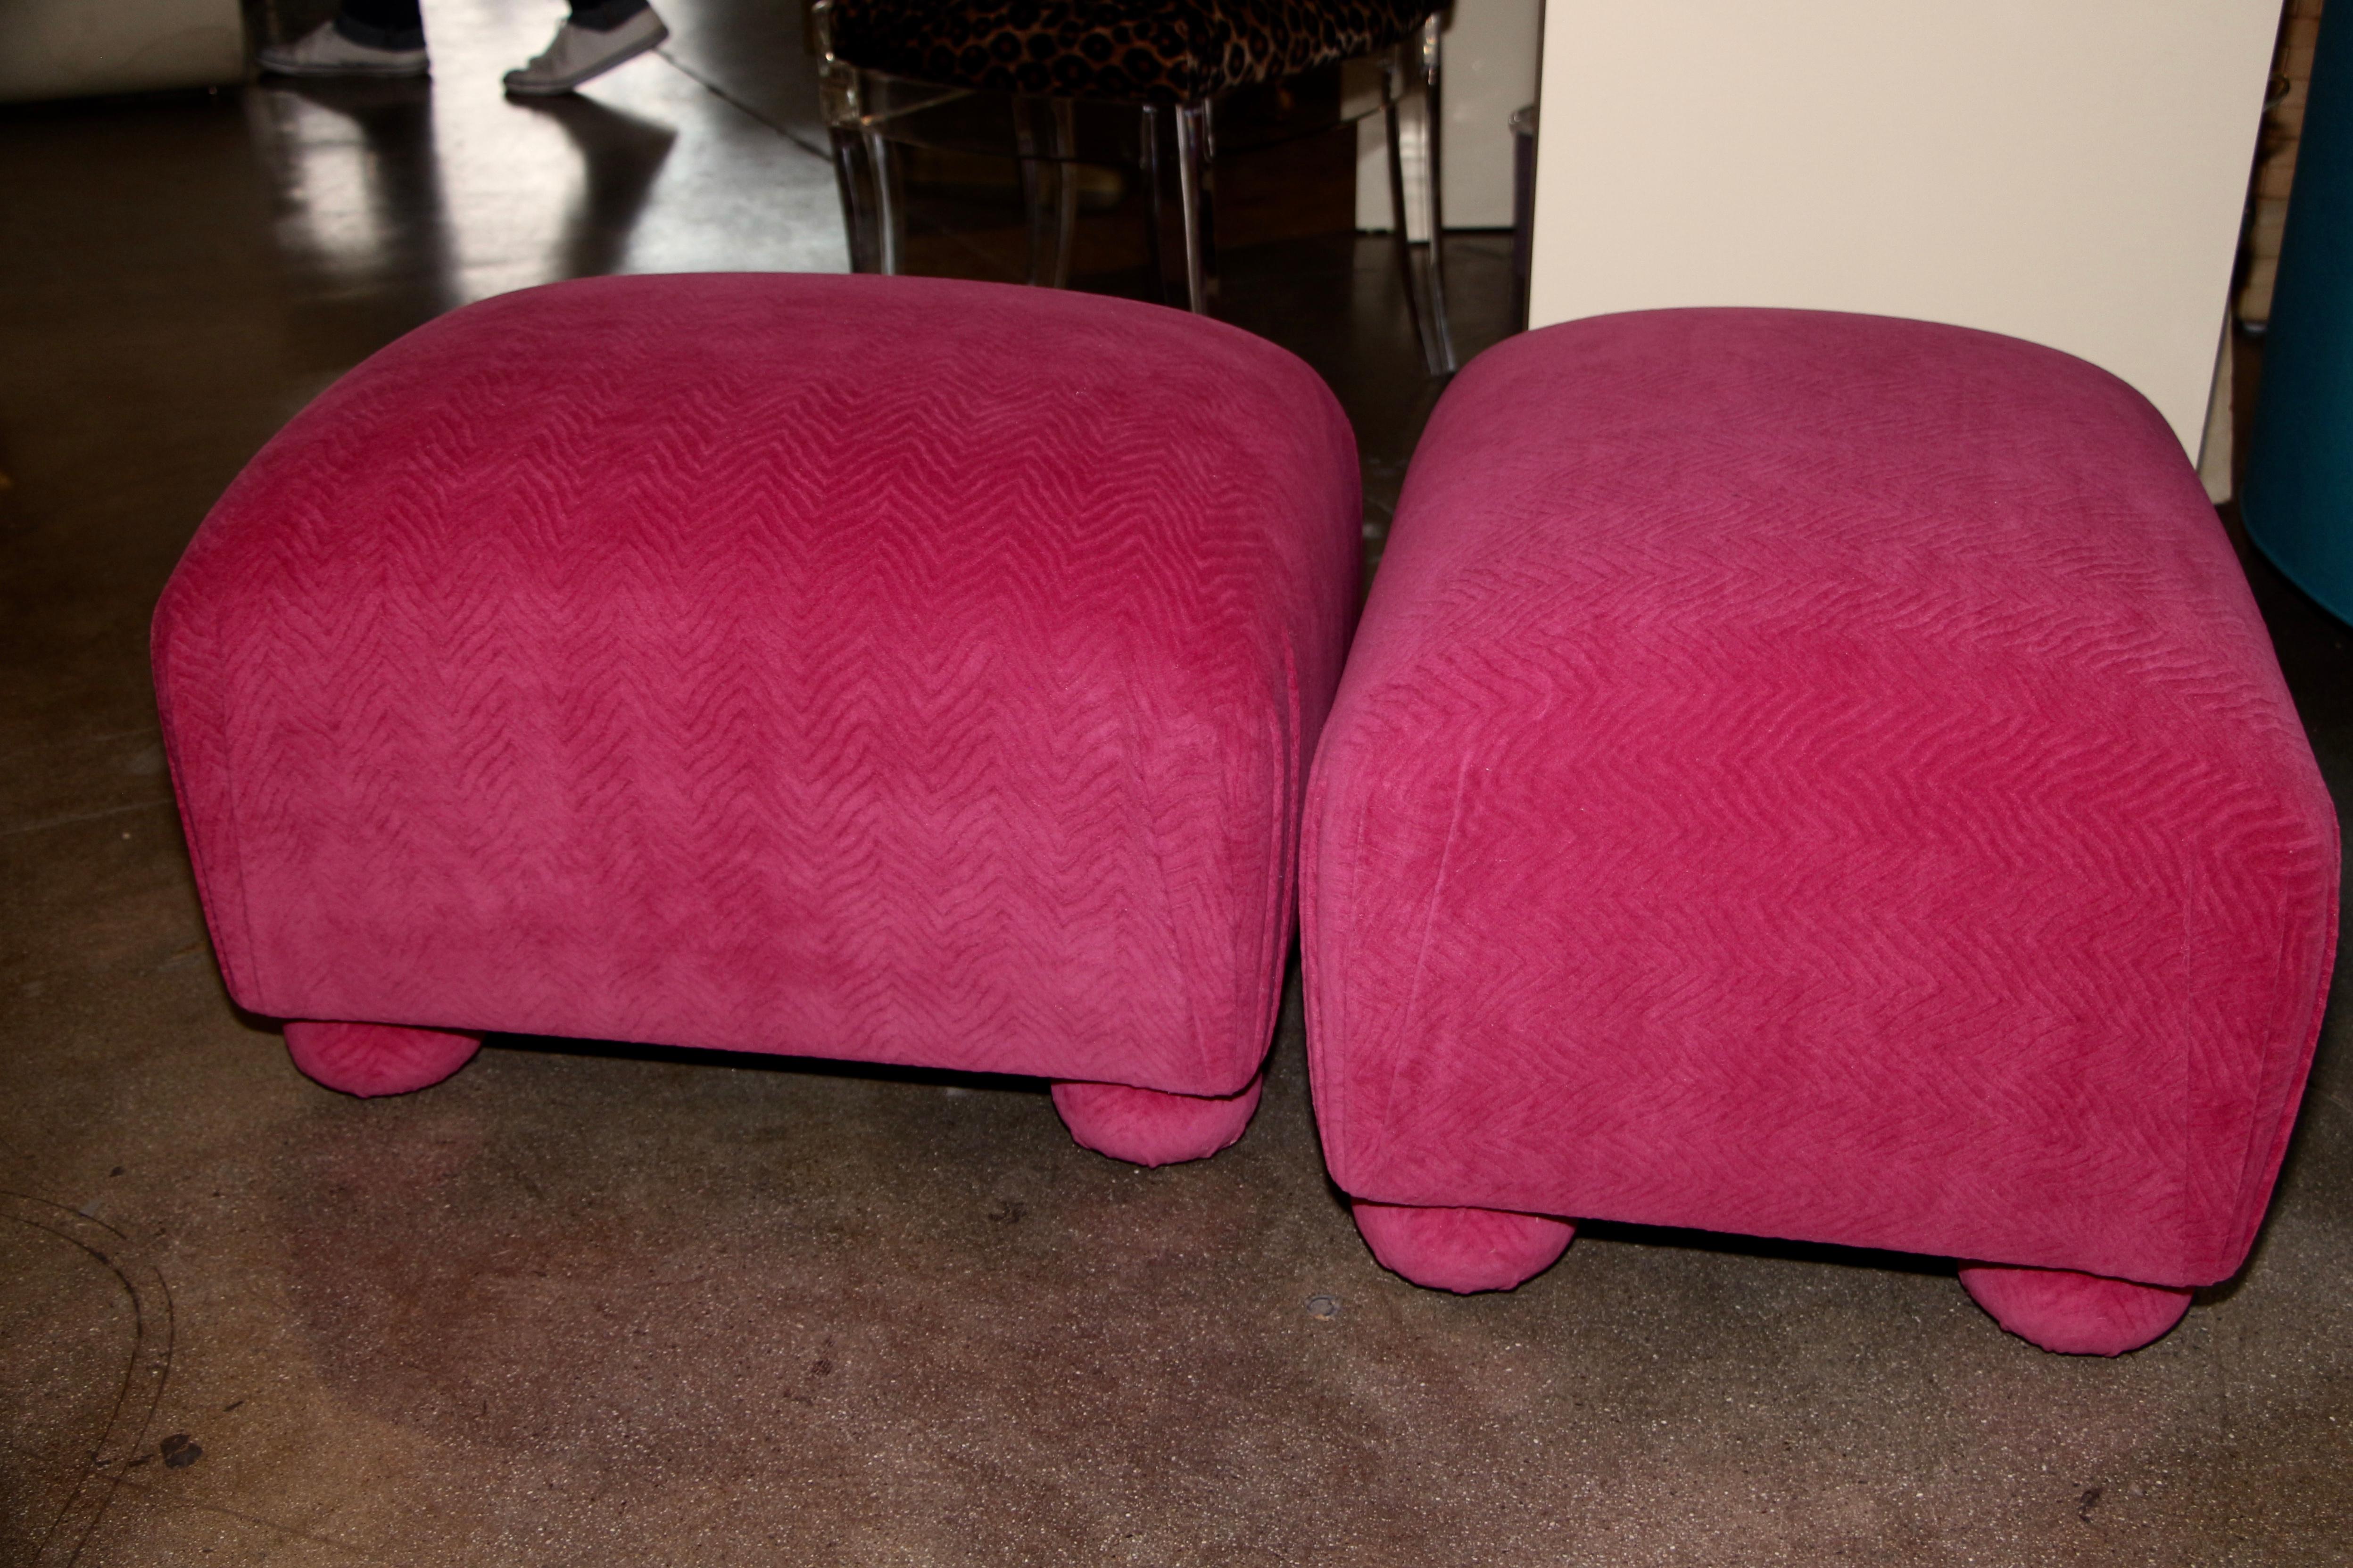 A nice pair of vintage ottomans re-upholstered in a beautiful pink Fuschia wool Mohair fabric, with a slight pattern to it. They are extremely sturdy. They can be used as stools as well for extra seating.